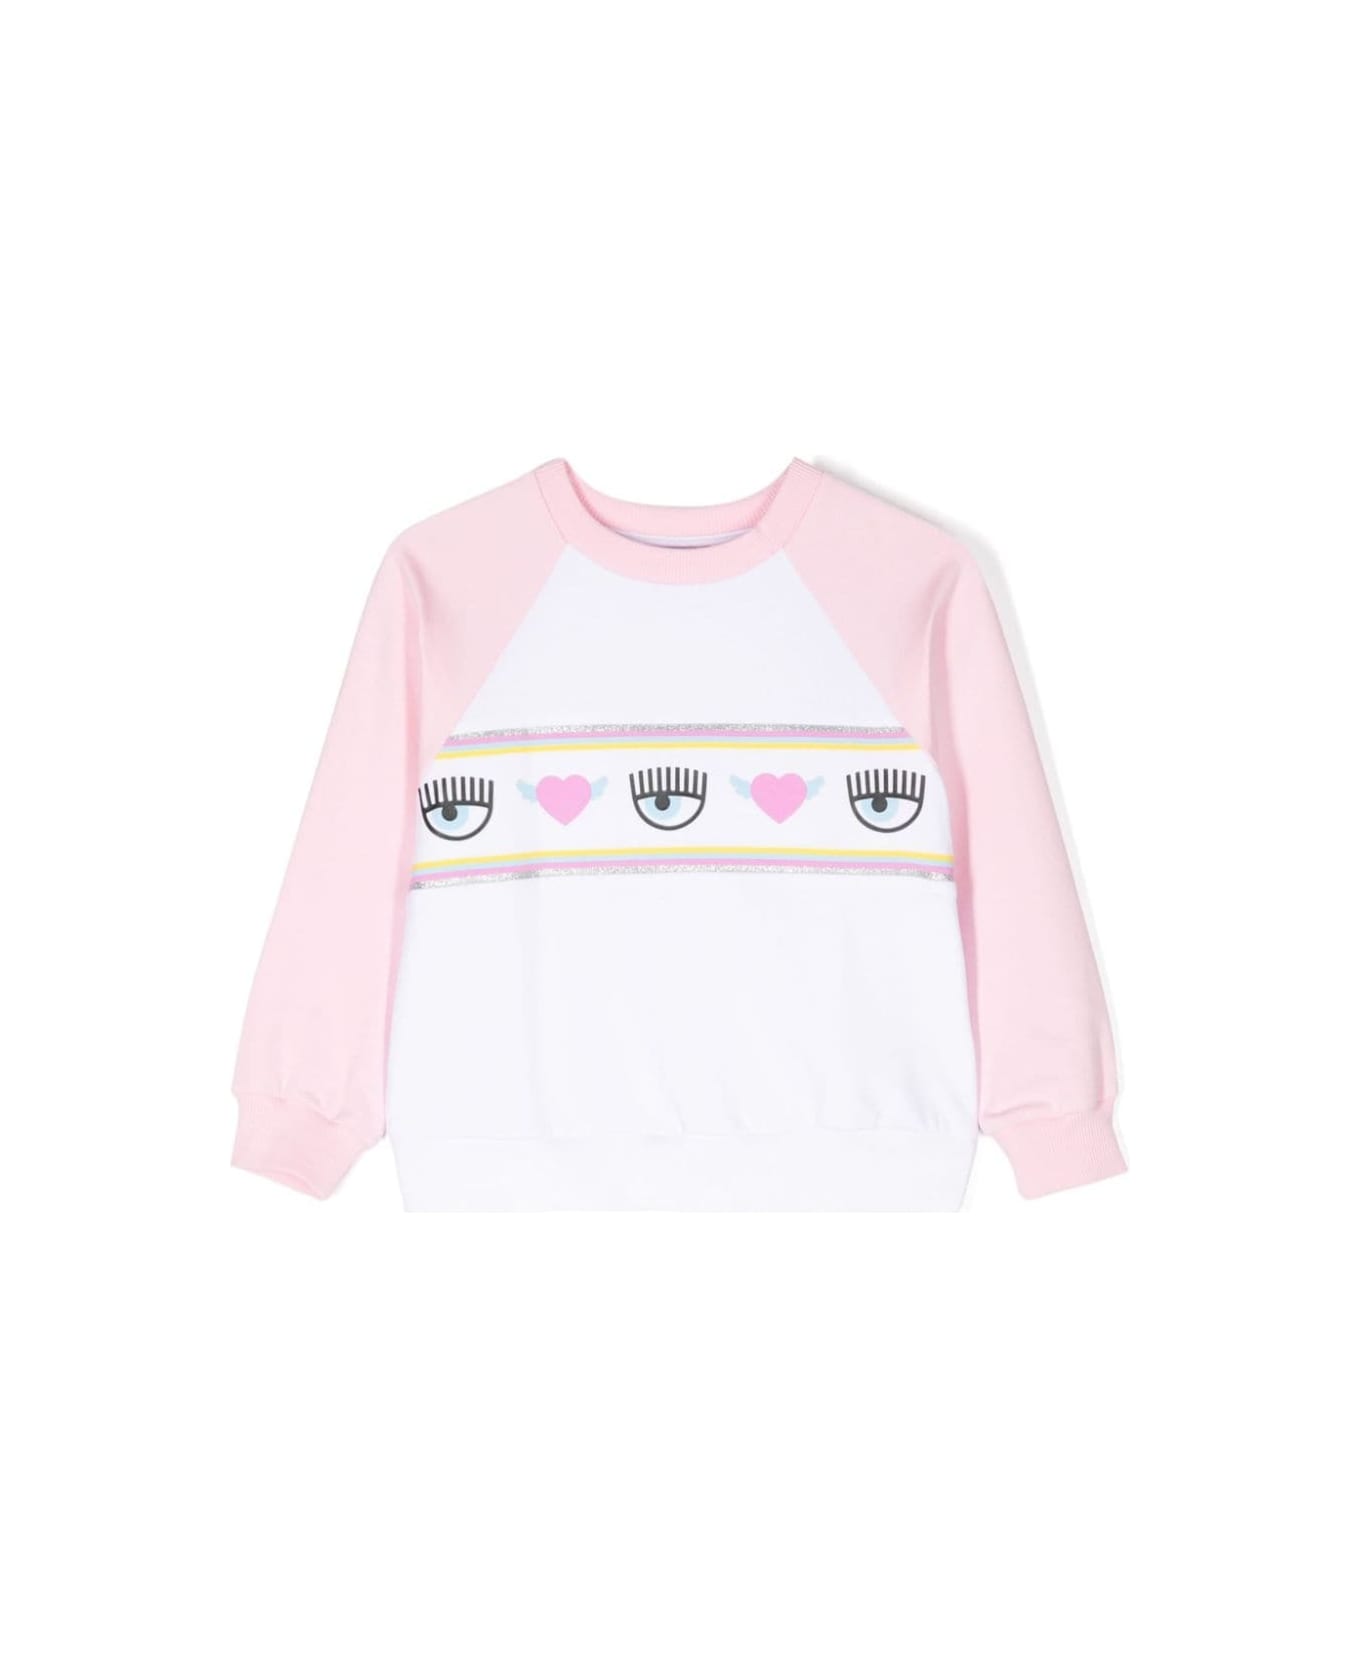 Chiara Ferragni Pink And White Sweatshirt With Branded Band In Cotton Blend Girl - White